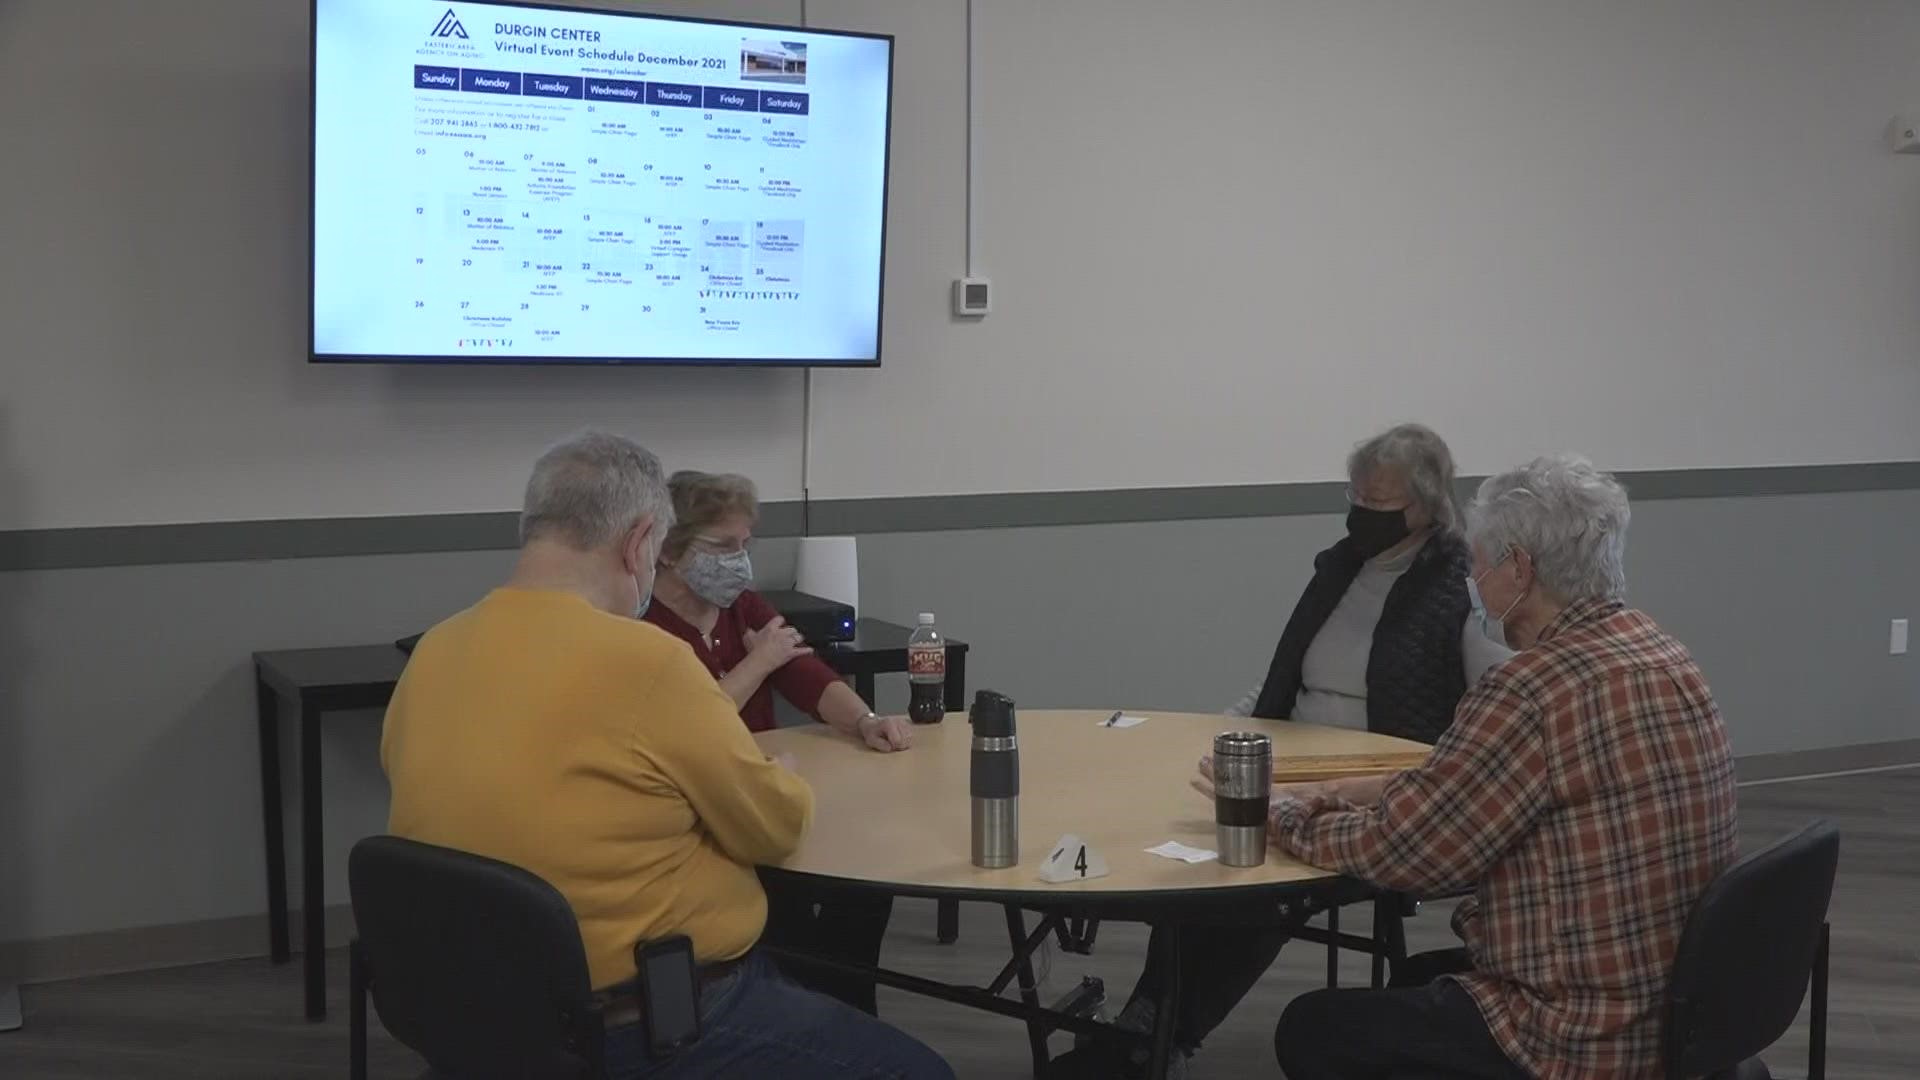 The new facility in Brewer is giving seniors a place to stay connected.